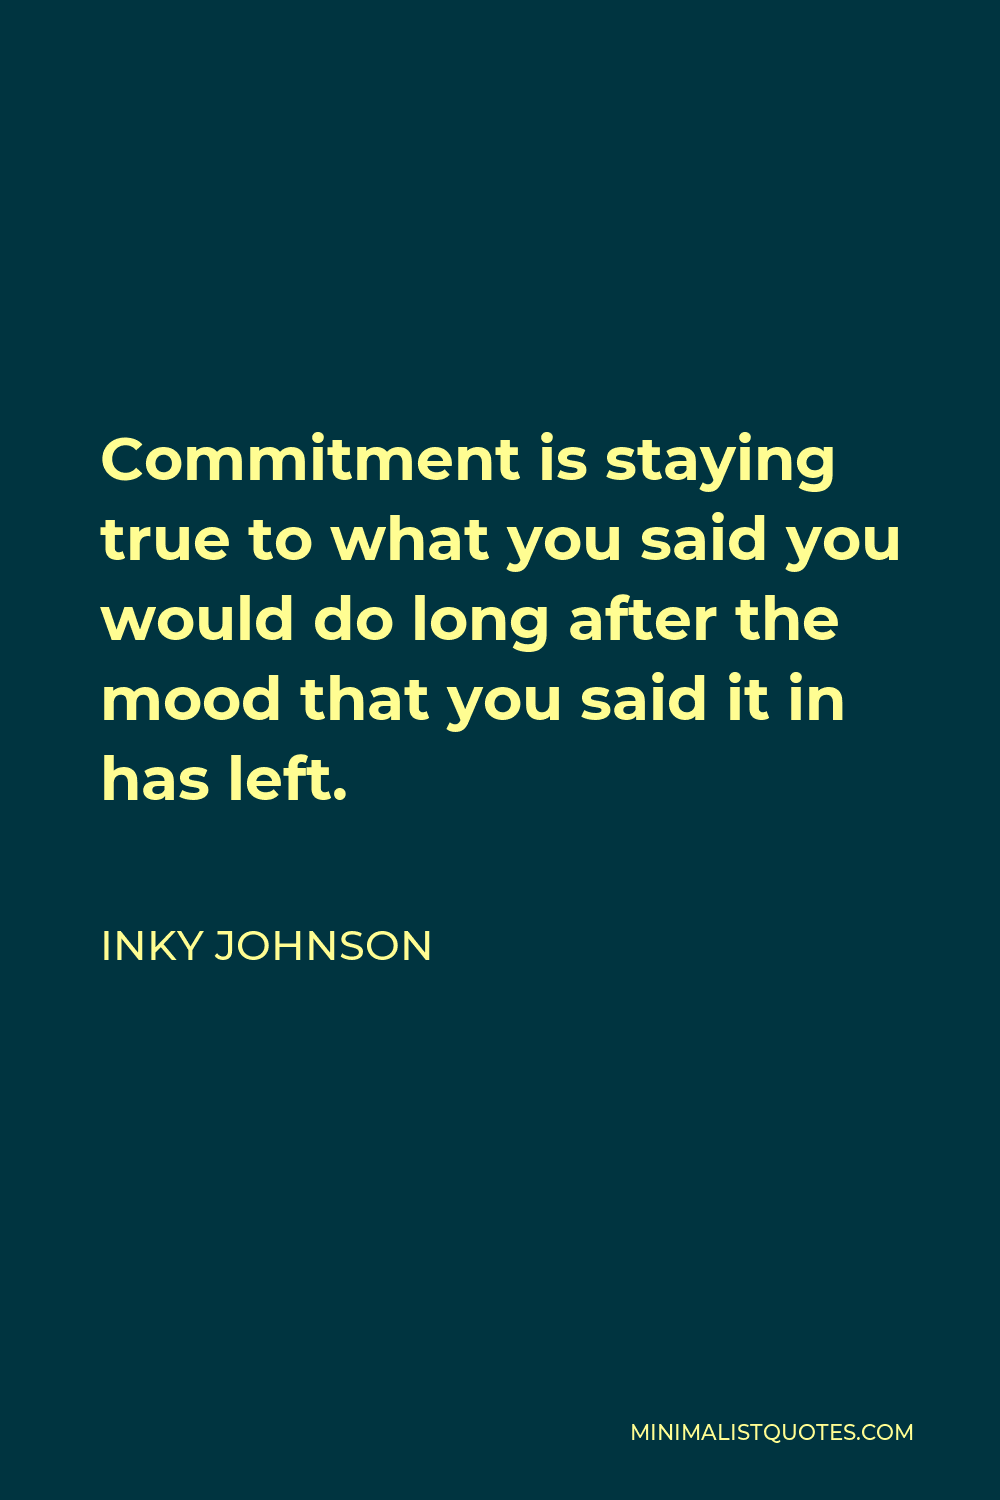 Inky Johnson Quote - Commitment is staying true to what you said you would do long after the mood that you said it in has left.